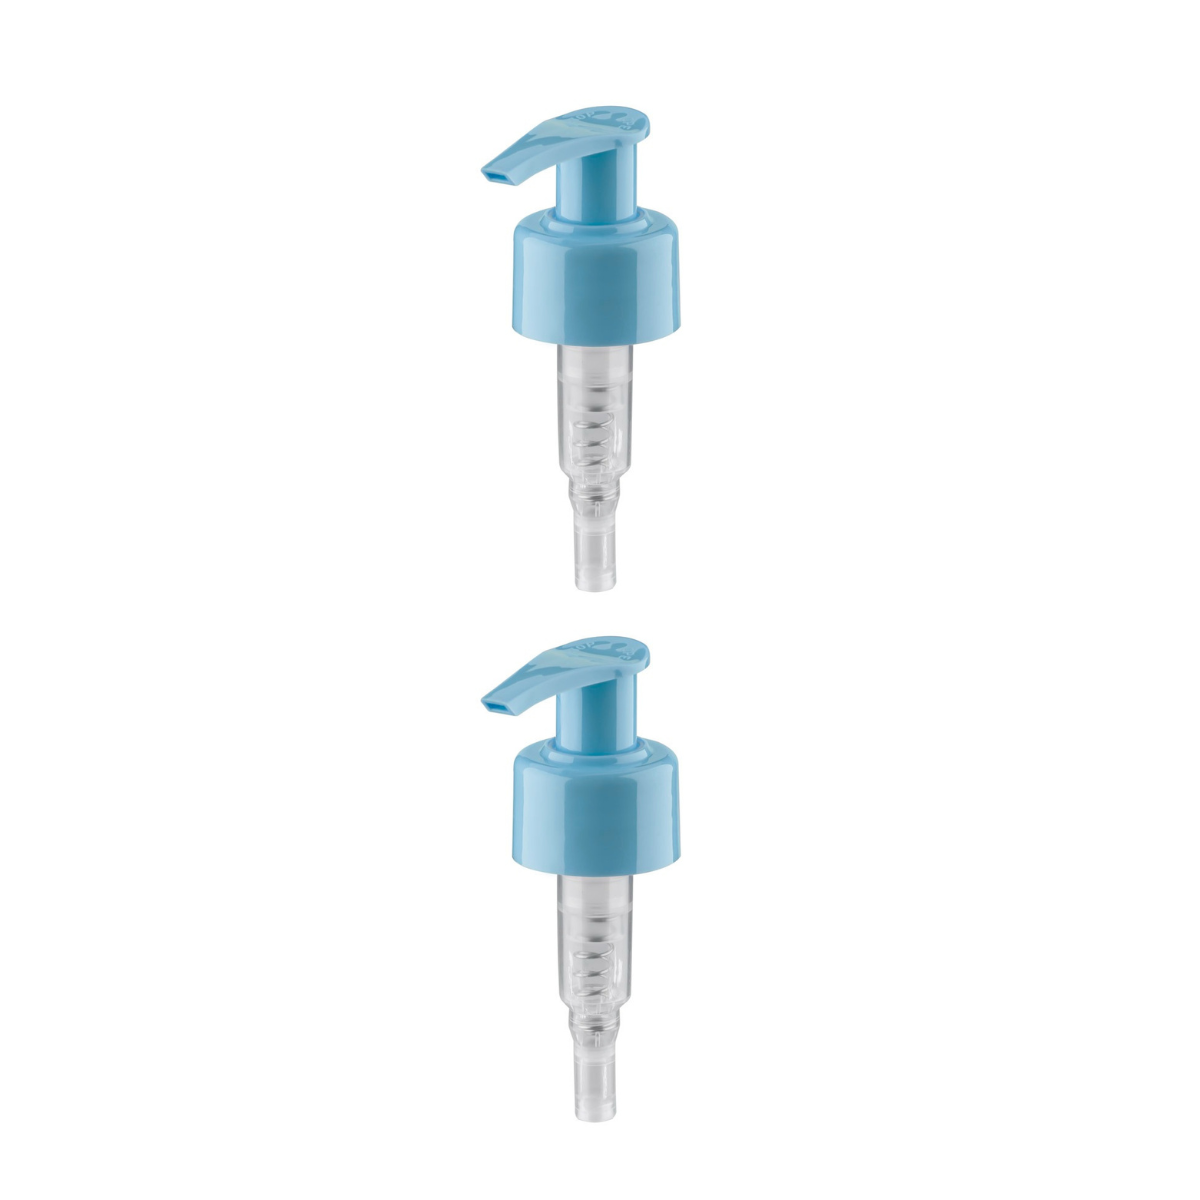 Dompel Pump valves, color blue, thread 28/410, made with stainless steel springs and glass balls, Model 303-A1. (Pump heads only, bottles not included) - depilcompany